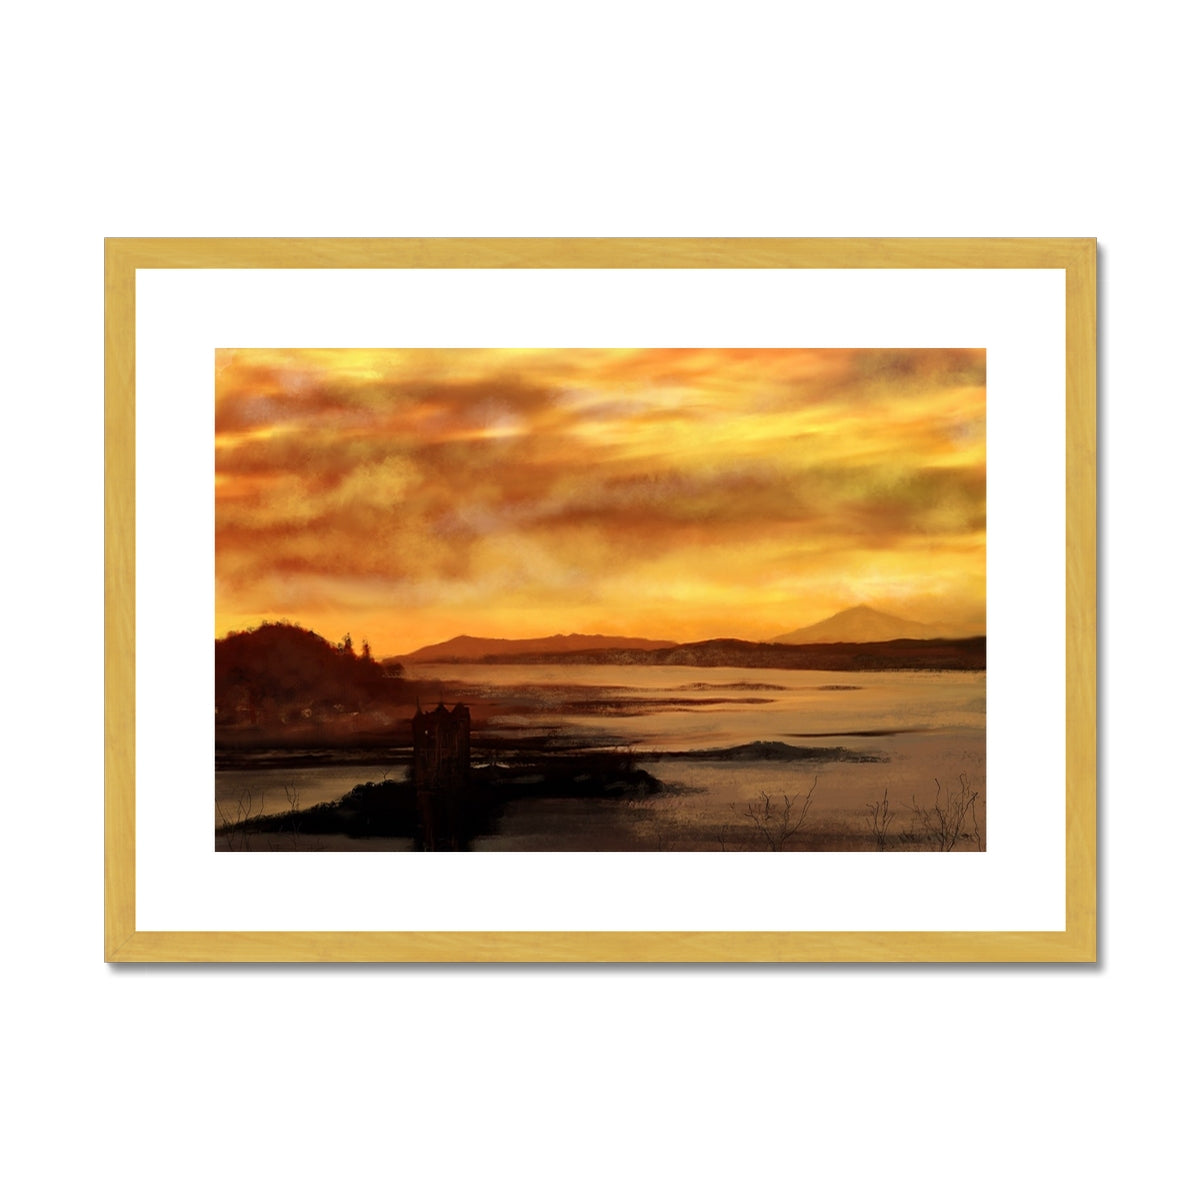 Castle Stalker Dusk Painting | Antique Framed & Mounted Prints From Scotland-Antique Framed & Mounted Prints-Historic & Iconic Scotland Art Gallery-A2 Landscape-Gold Frame-Paintings, Prints, Homeware, Art Gifts From Scotland By Scottish Artist Kevin Hunter